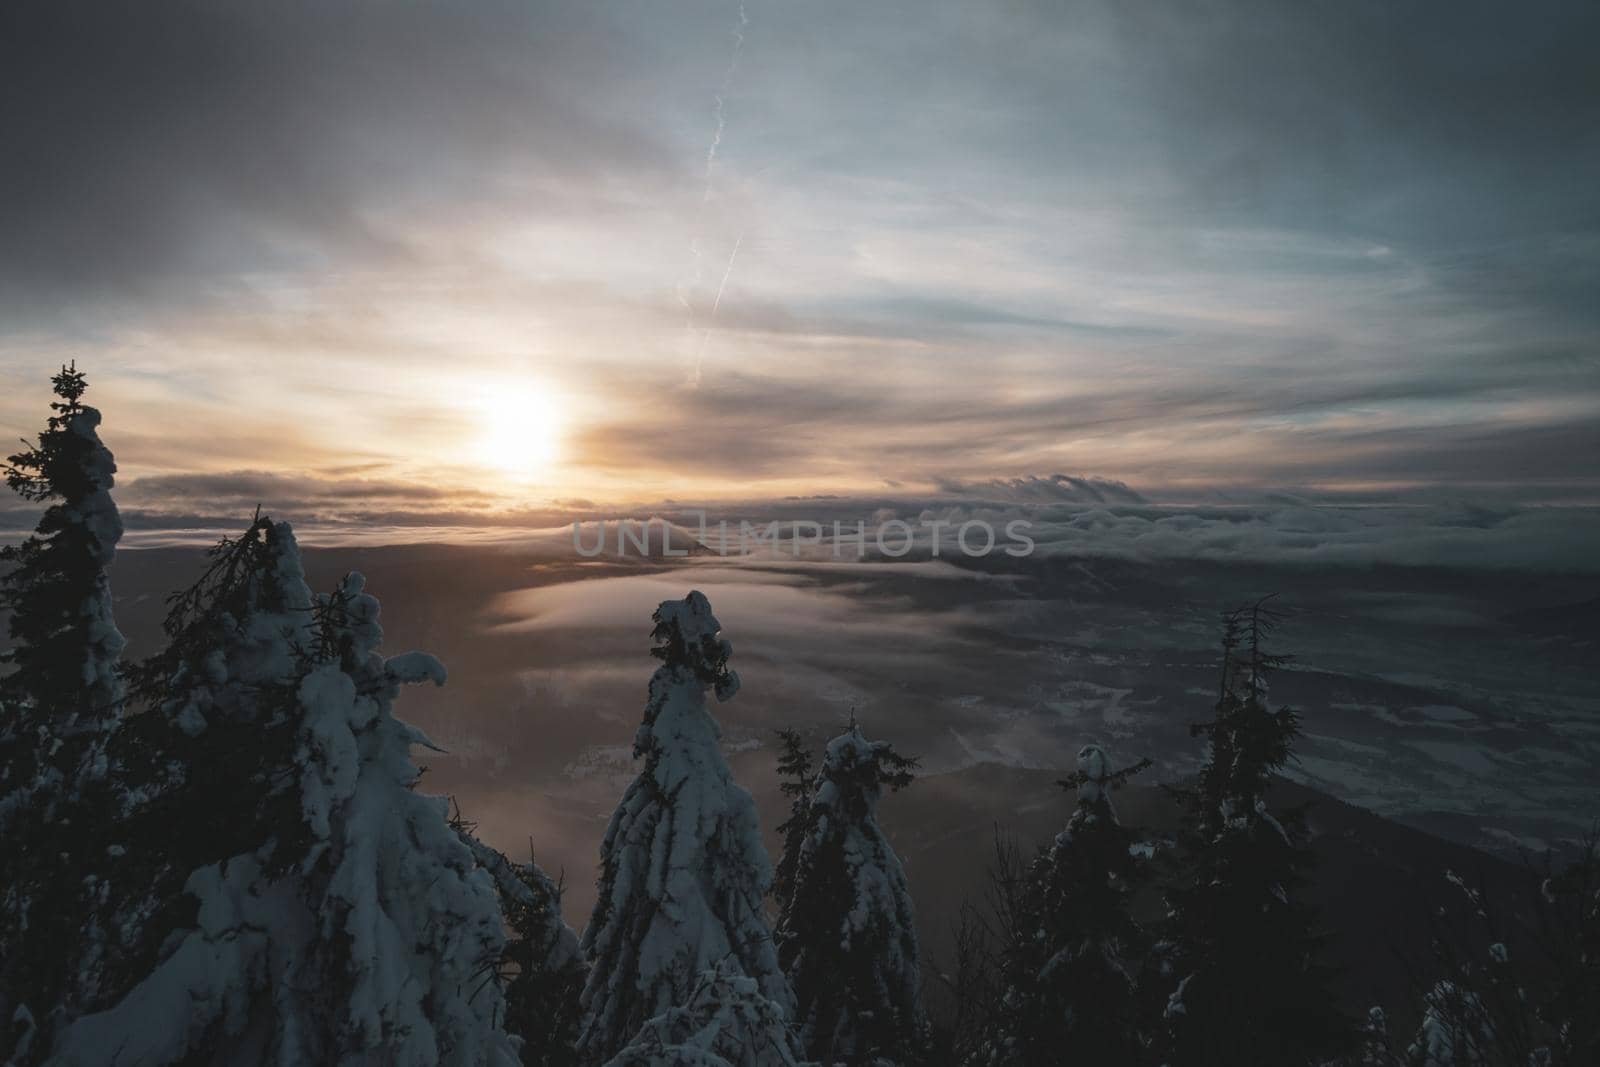 Dramatic Sunset with Frozen Trees and Valley View in Czech Republic from the top of mountain by Skrobanek